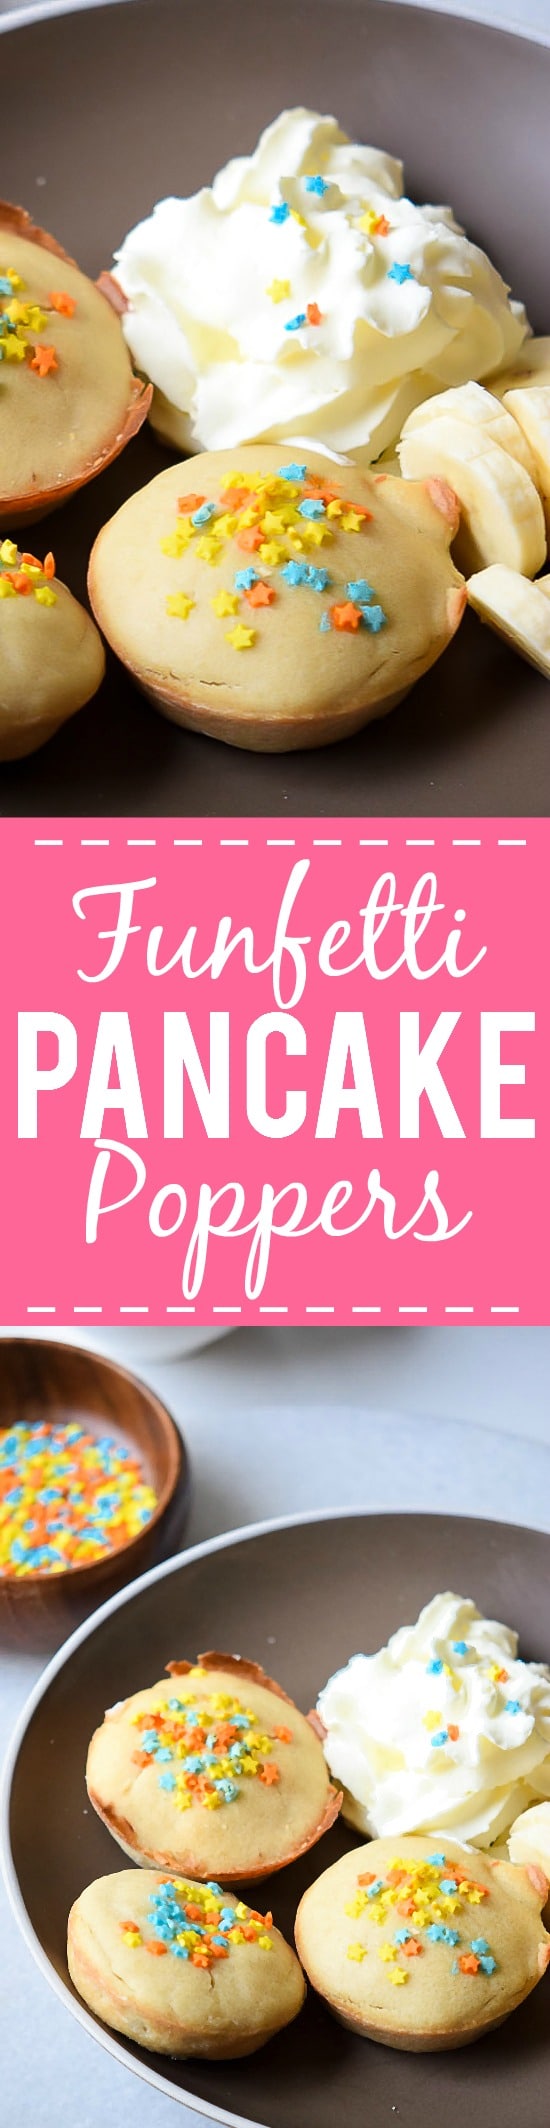 Funfetti Pancake Poppers recipe - These fun Funfetti Pancakes Poppers are a super easy breakfast recipe that the kids will love.  Perfect for even week day mornings or on the go! Yummy and easy breakfast recipe perfect for kids!